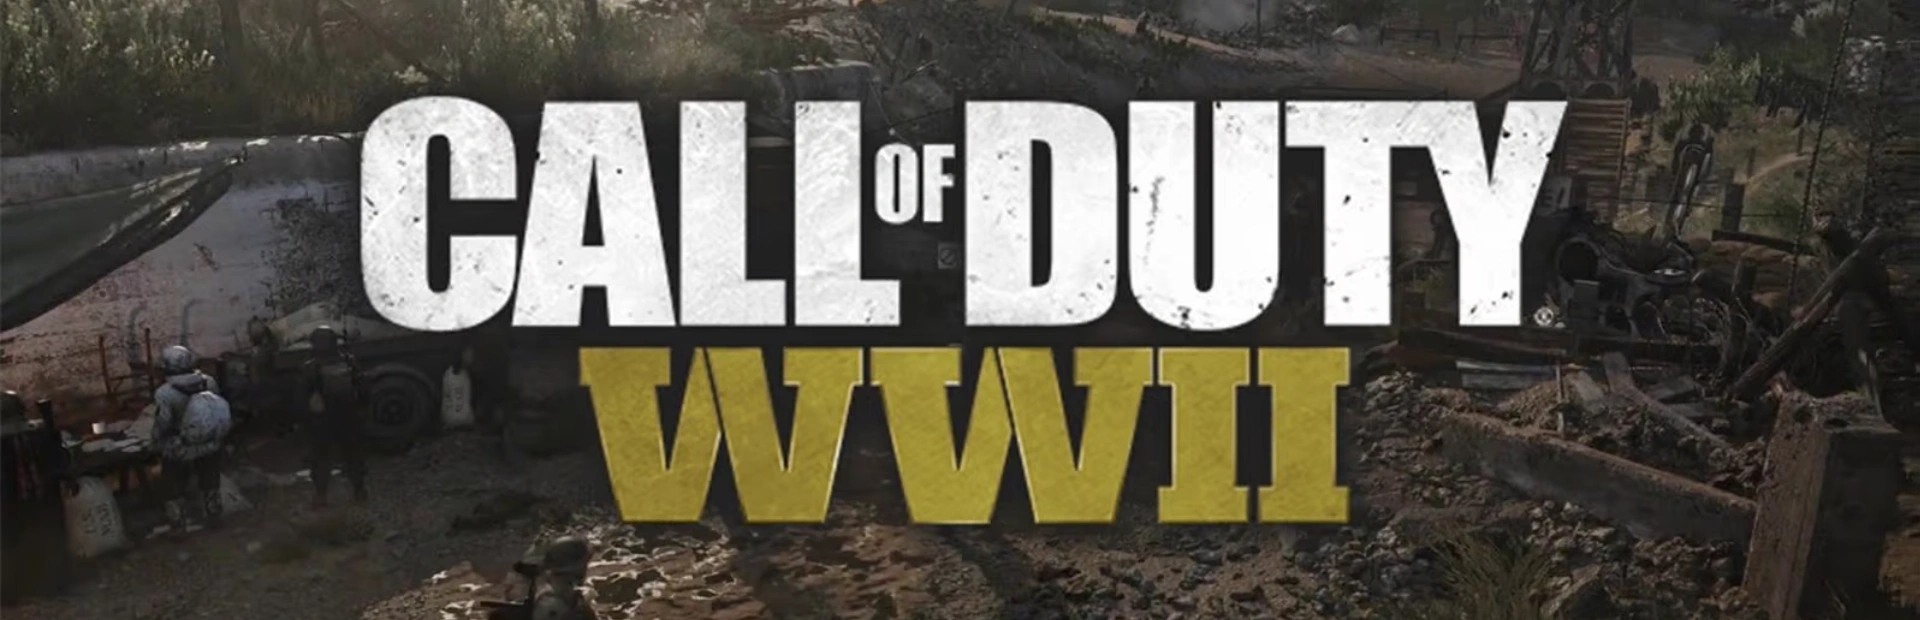 Call of Duty WWII.banner2